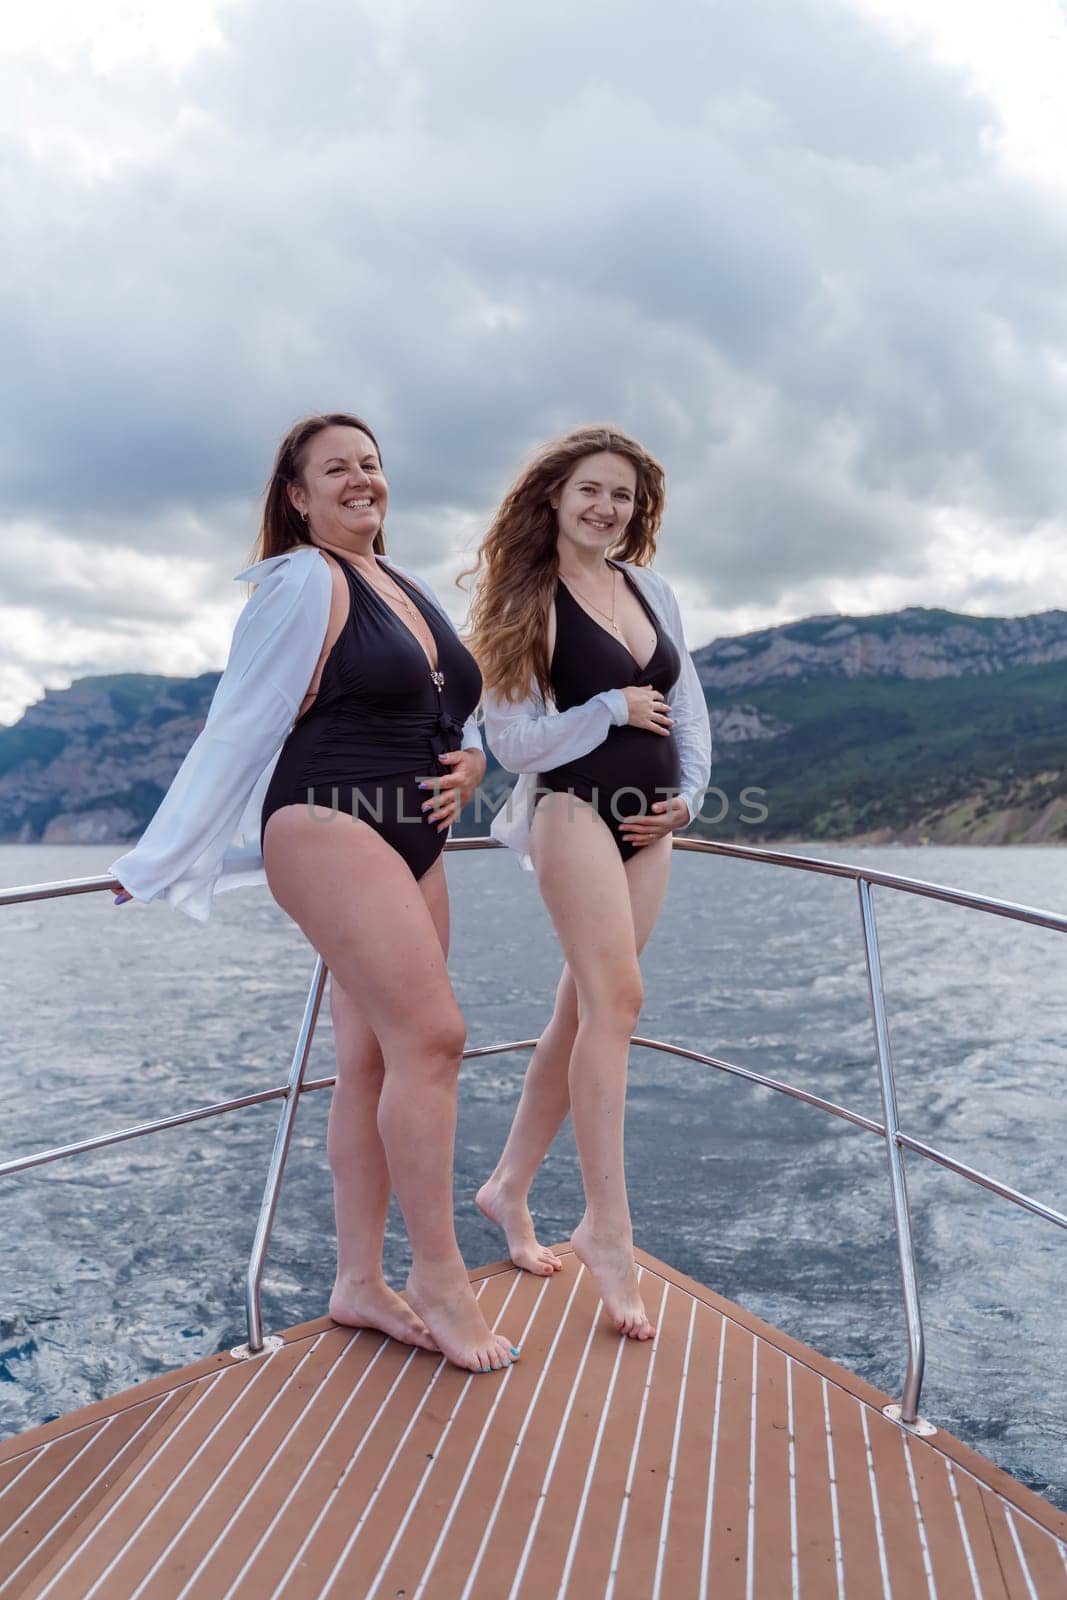 Pregnant on a yacht. Happy models in a swimsuit posing on a yacht against sky with clouds and mountains